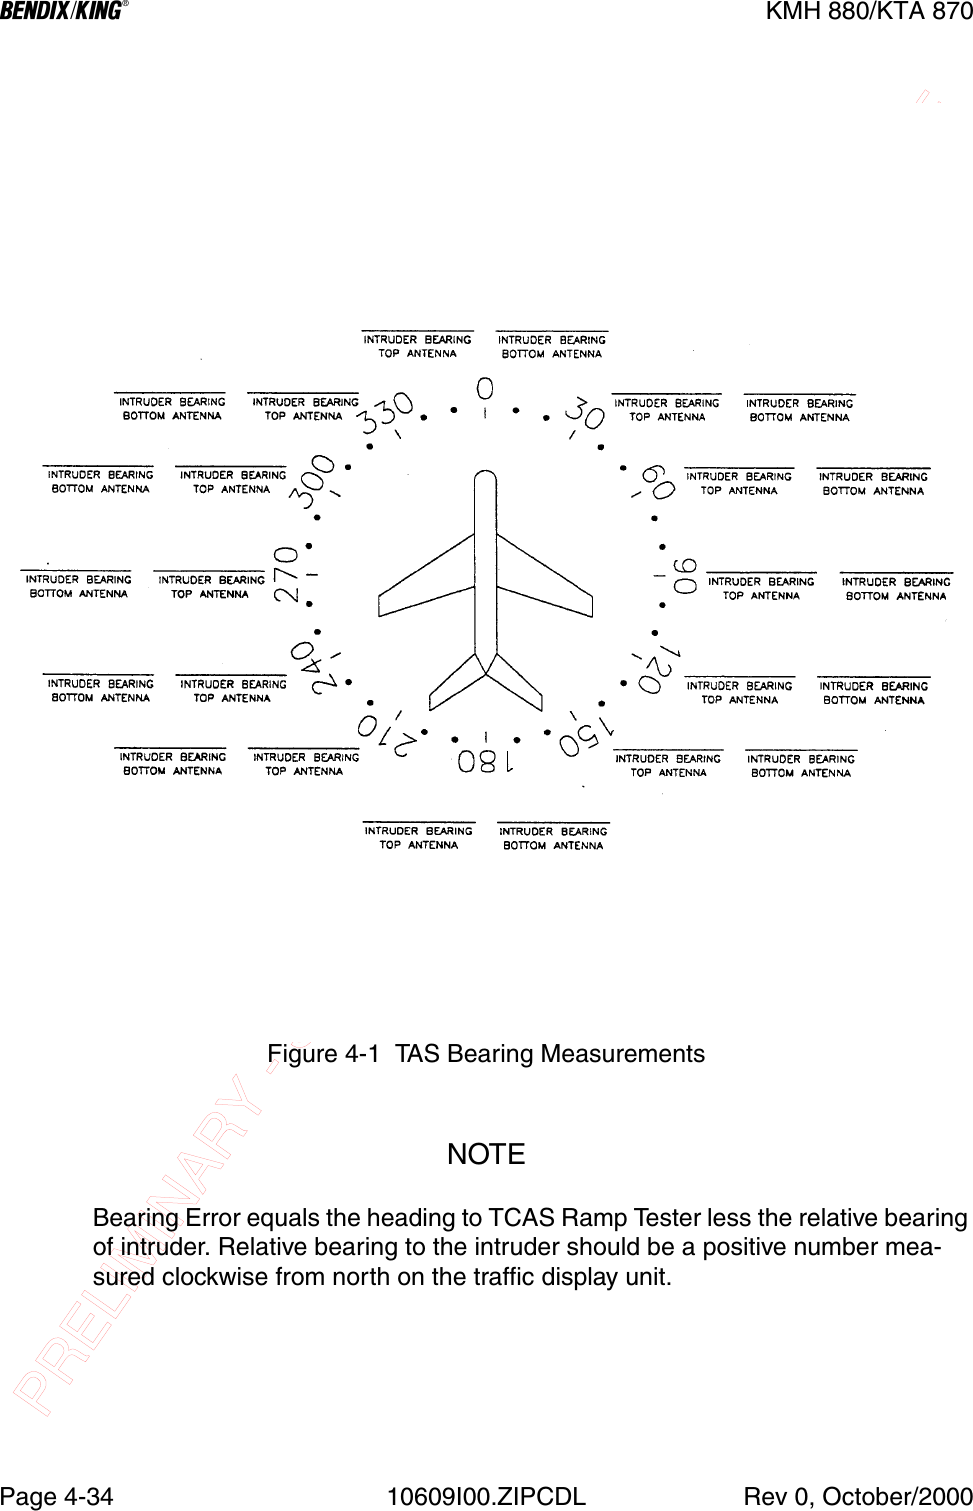 PRELIMINARY - SUBJECT TO CHANGE WITHOUT NOTICEBKMH 880/KTA 870Page 4-34 10609I00.ZIPCDL Rev 0, October/2000Figure 4-1  TAS Bearing MeasurementsNOTEBearing Error equals the heading to TCAS Ramp Tester less the relative bearing of intruder. Relative bearing to the intruder should be a positive number mea-sured clockwise from north on the traffic display unit.